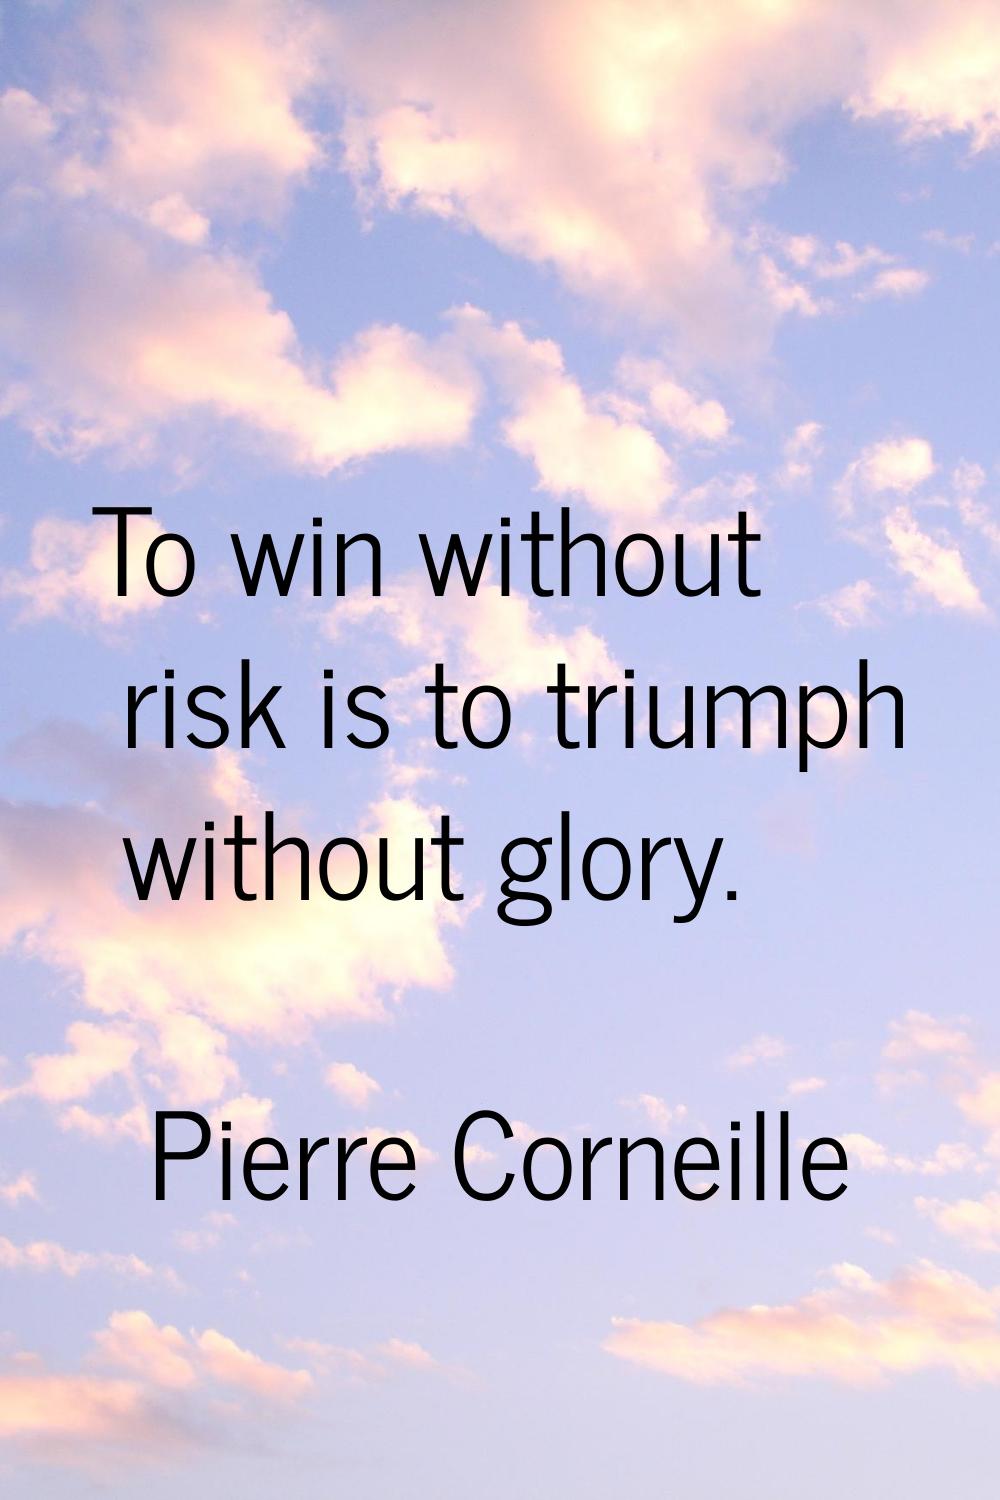 To win without risk is to triumph without glory.